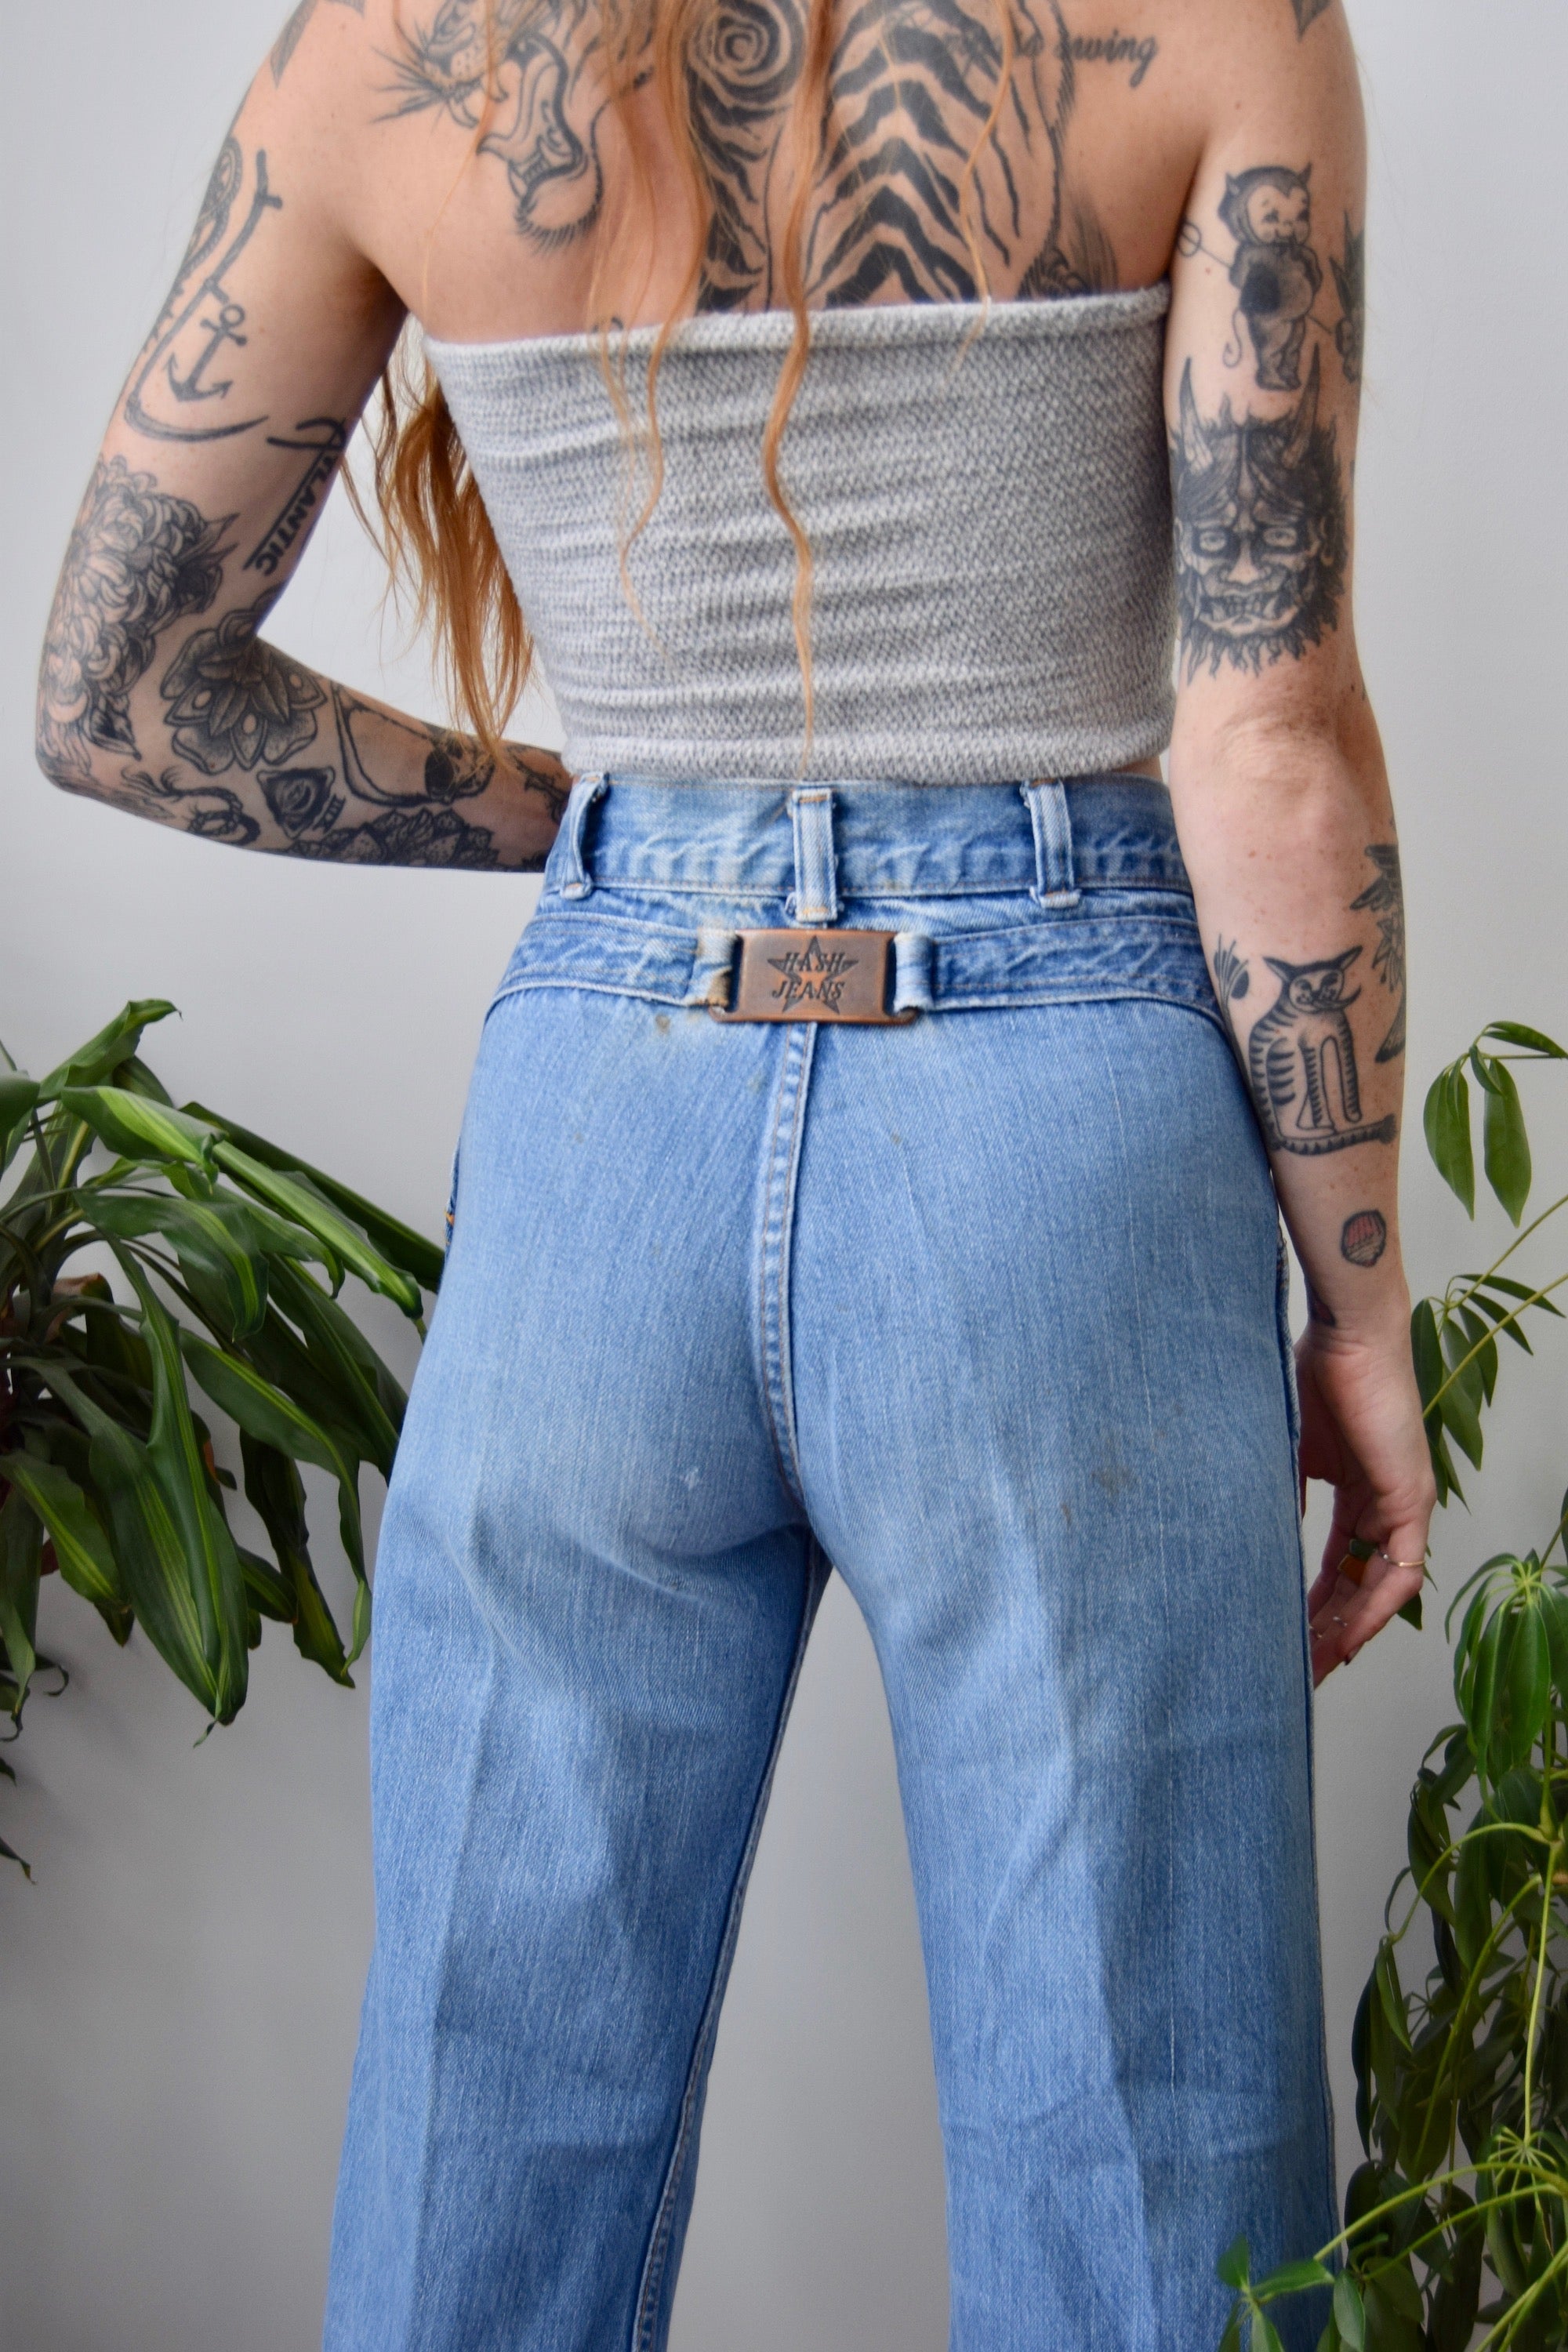 "HASH" Buckle Jeans